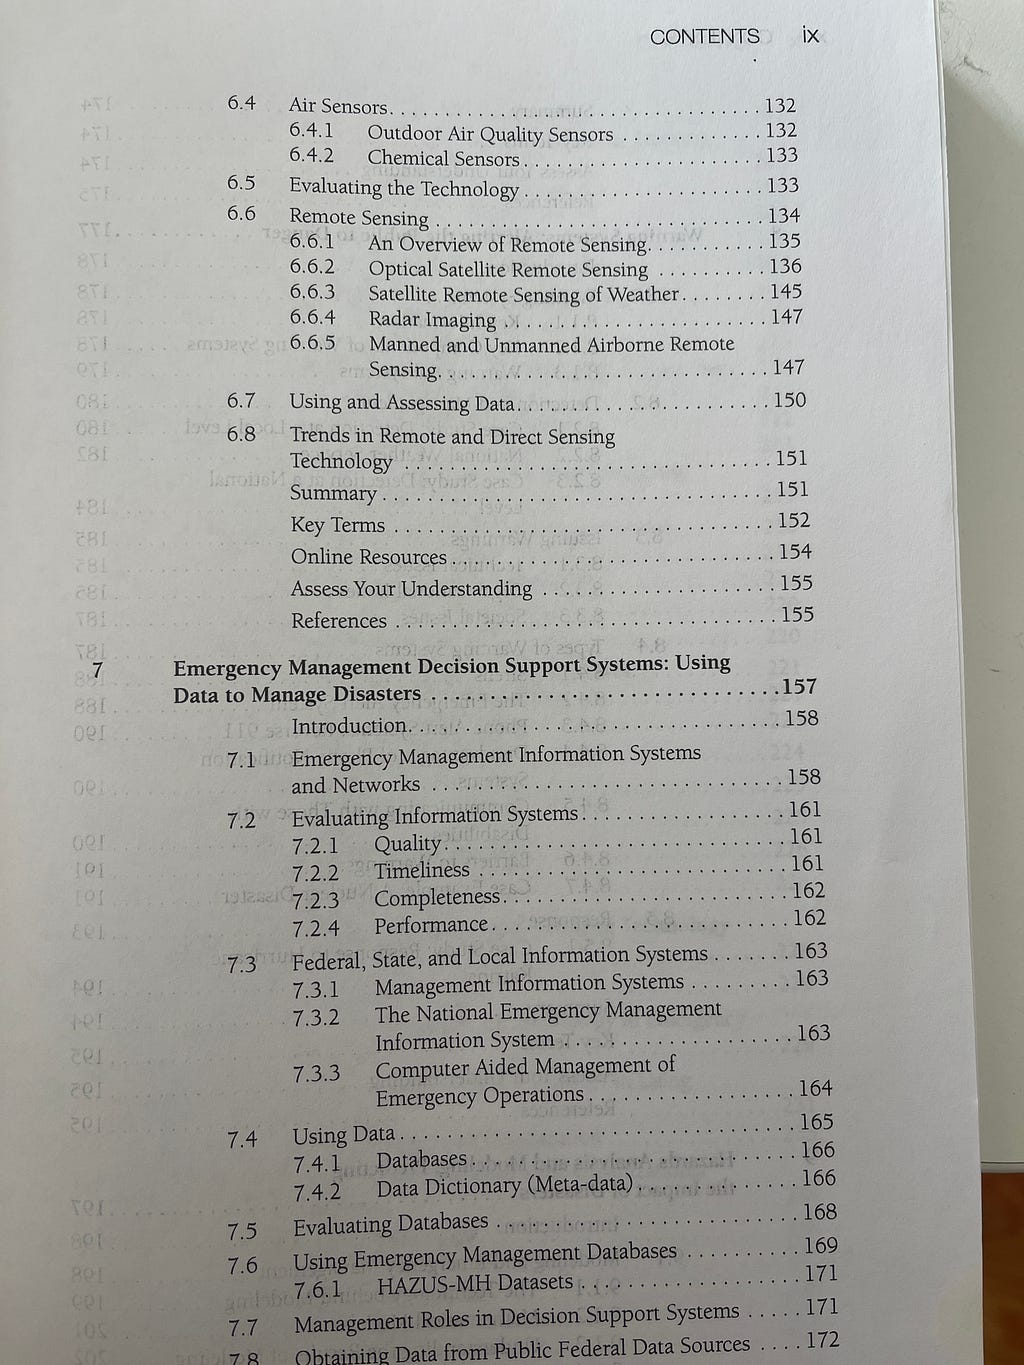 This collection of topics is as such that I can look for the topic i’m interested in. However, it still doesn’t really provide us with an idea of why these technologies were selected or an internal way for the author to communicate a reason, a justification for what we’re going through in the book.